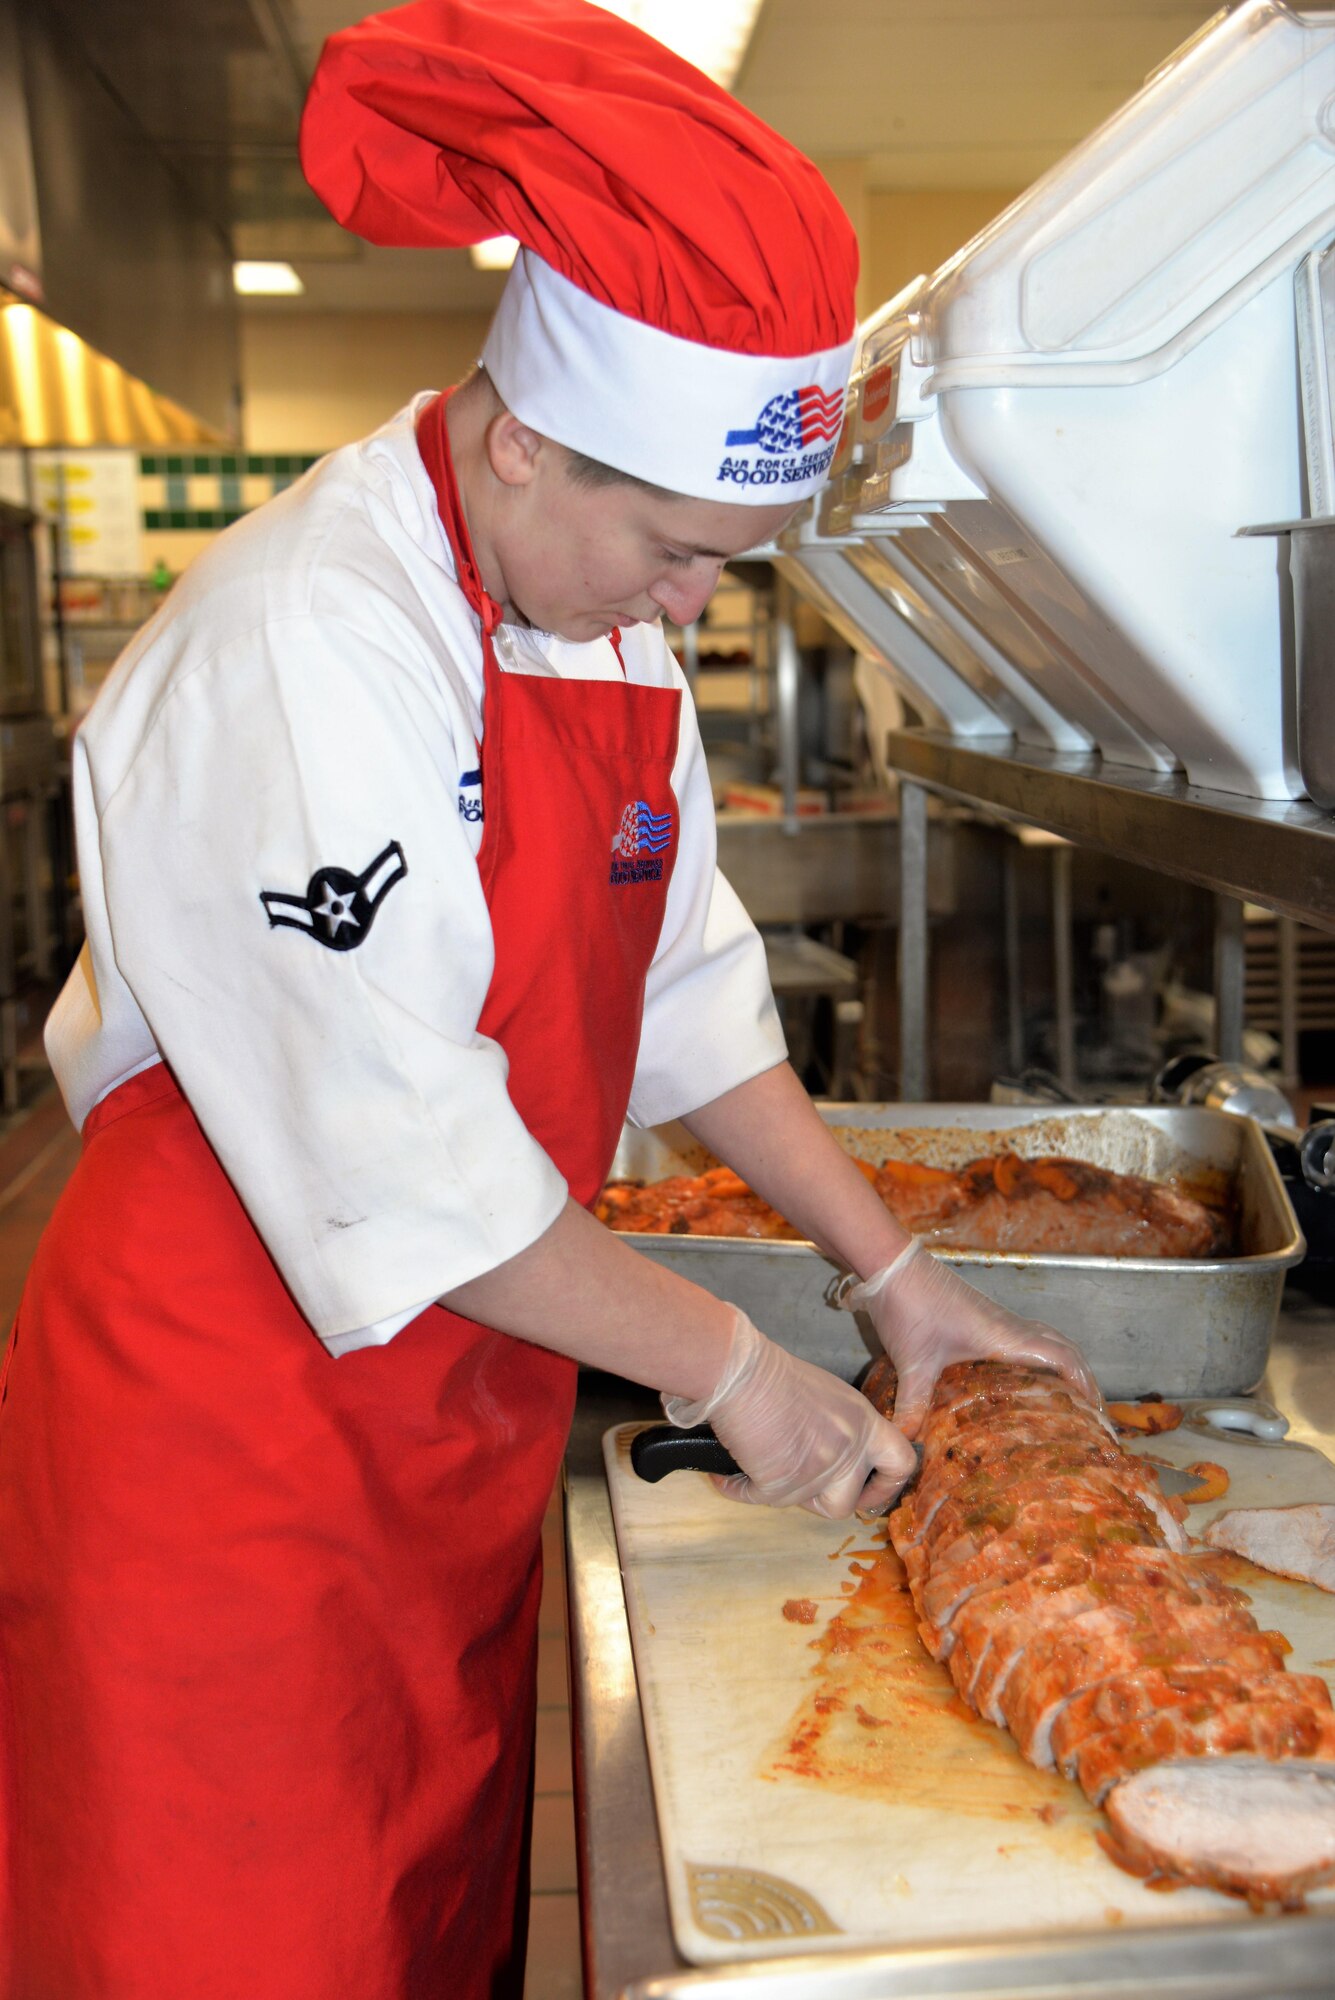 Airman Candace Ellenburg, 90th Force Support Squadron food services apprentice, prepares for lunch in Chadwell dining facility at F. E. Warren Air Force Base, Wyo., Dec. 17, 2016. Ellenburg is an eager food service Amn always willing to lend a hand and improve her culinary skills. (U.S. Air Force phot by 2nd Lt. Nikita Thorpe)